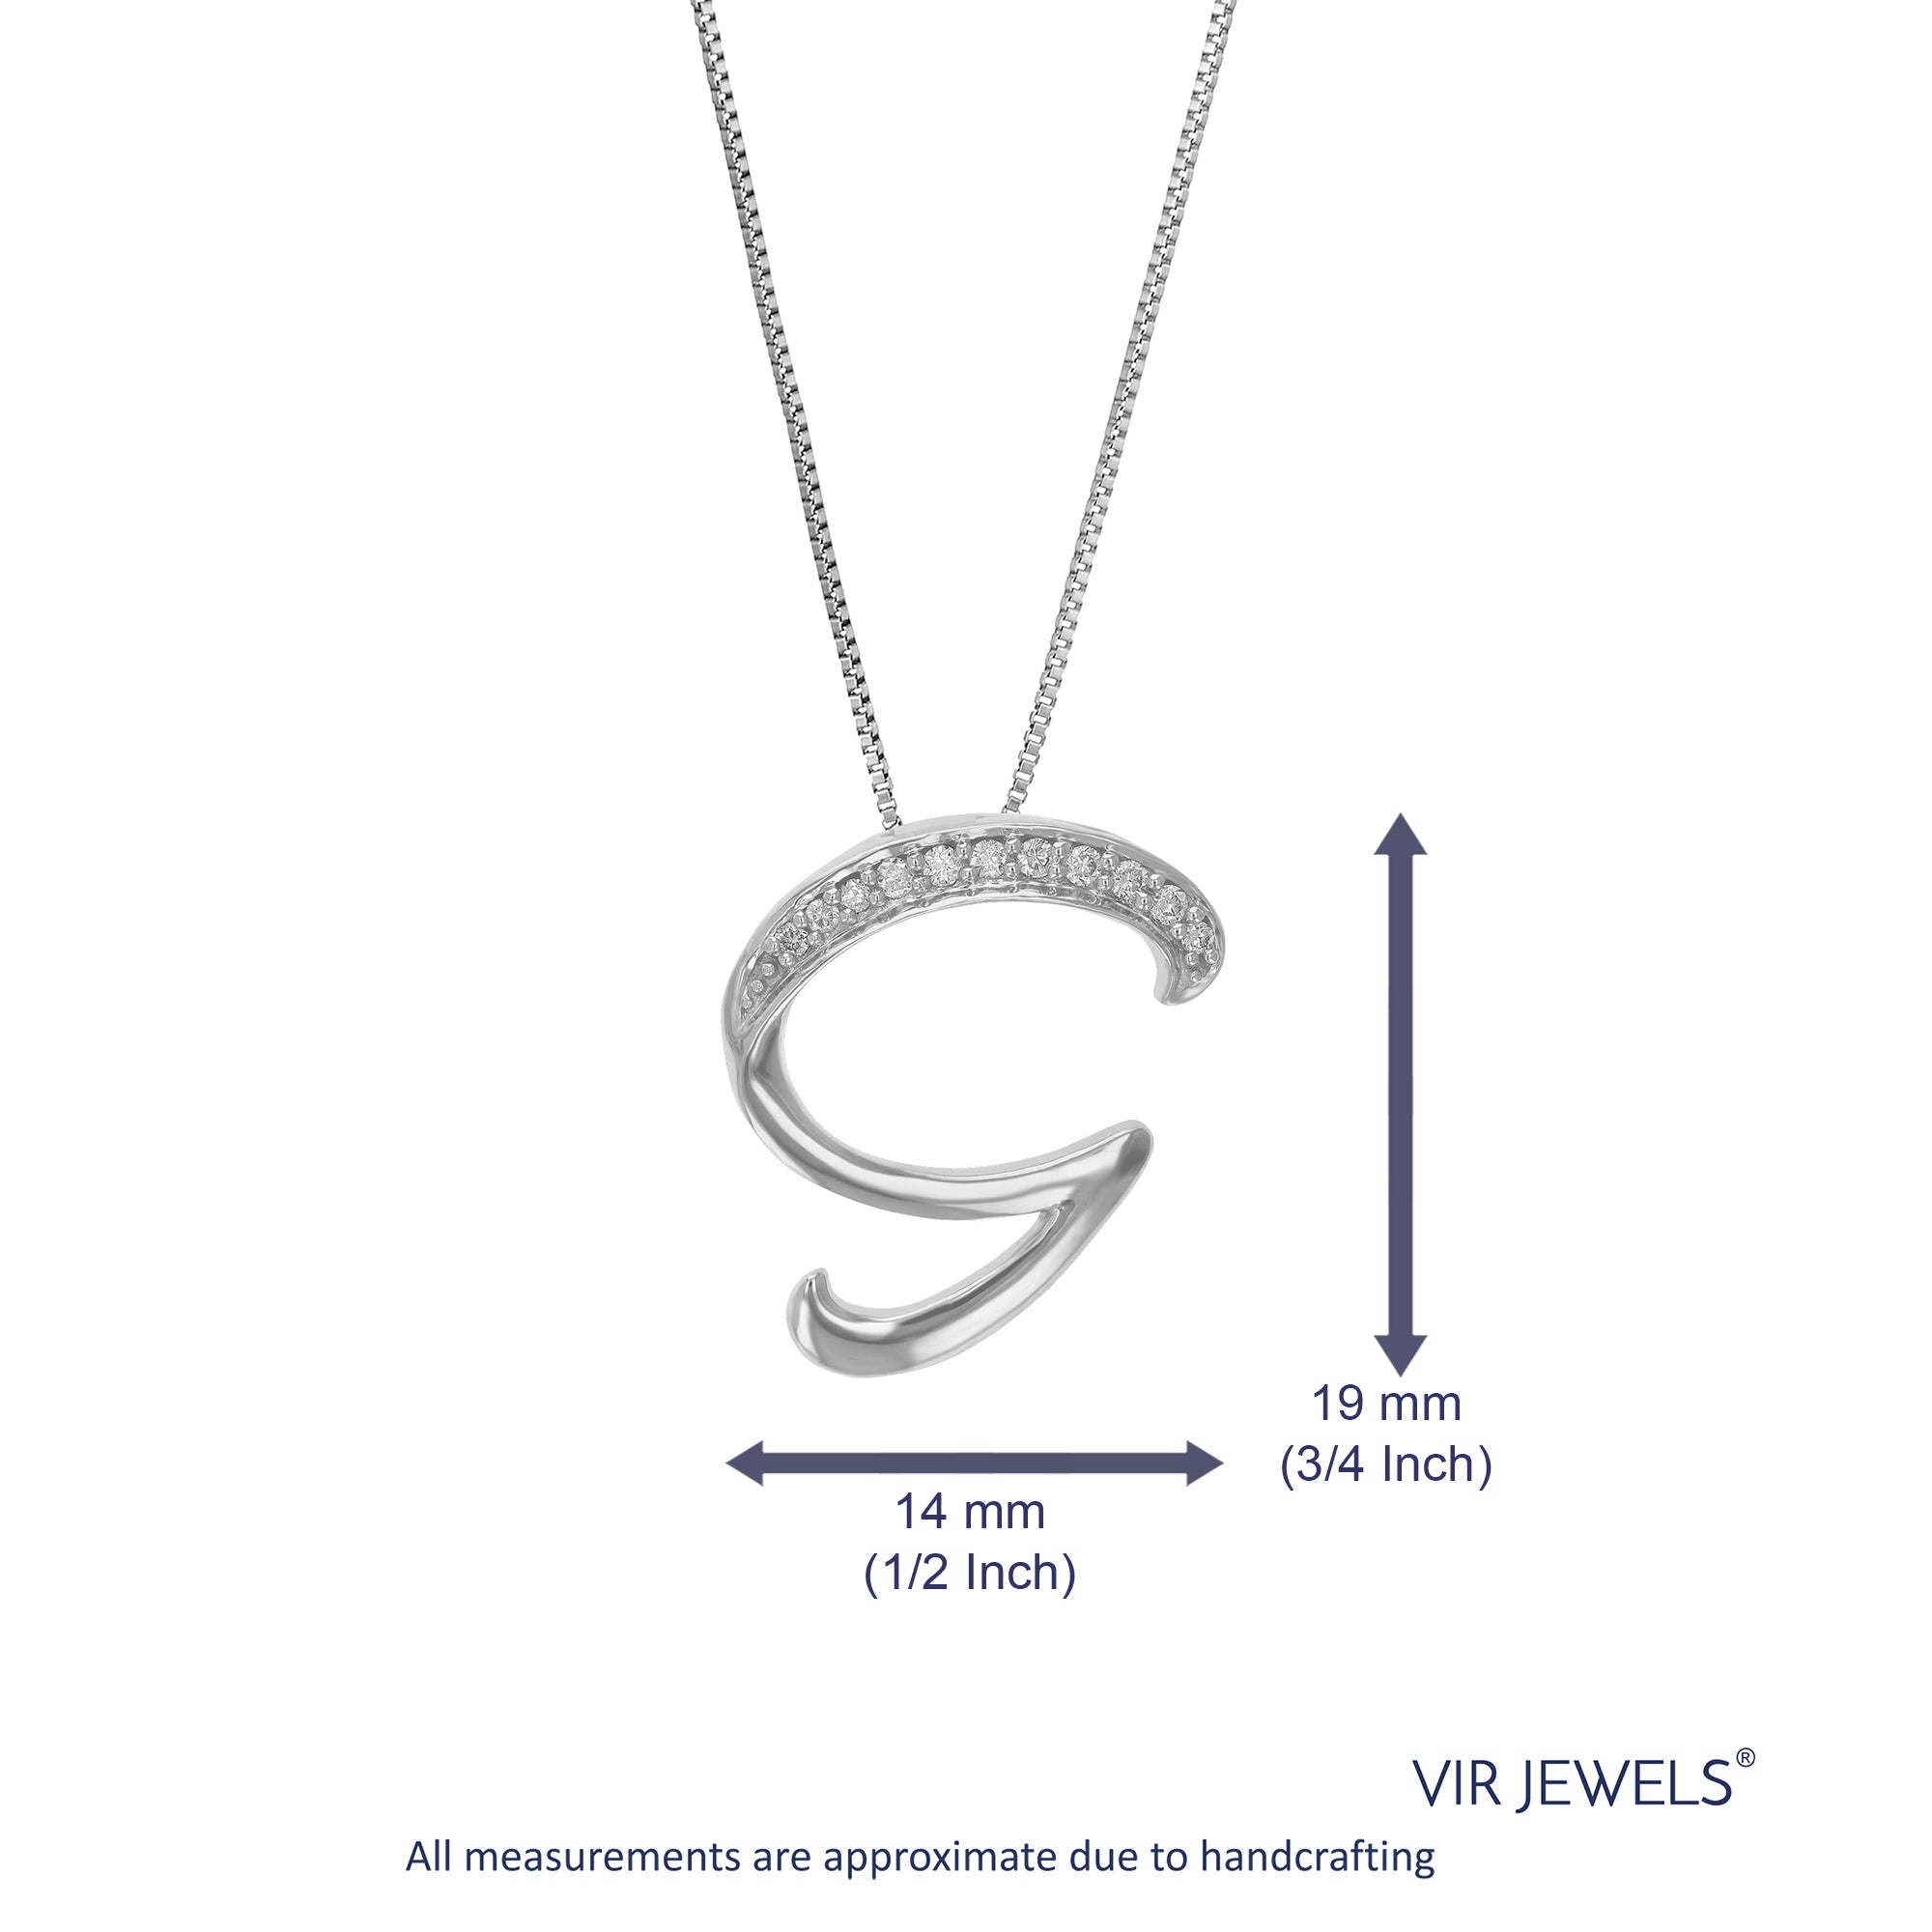 1/12 cttw Diamond Pendant Necklace for Women, Lab Grown Diamond Letter G Pendant Necklace in .925 Sterling Silver with Chain, Size 3/4 Inch